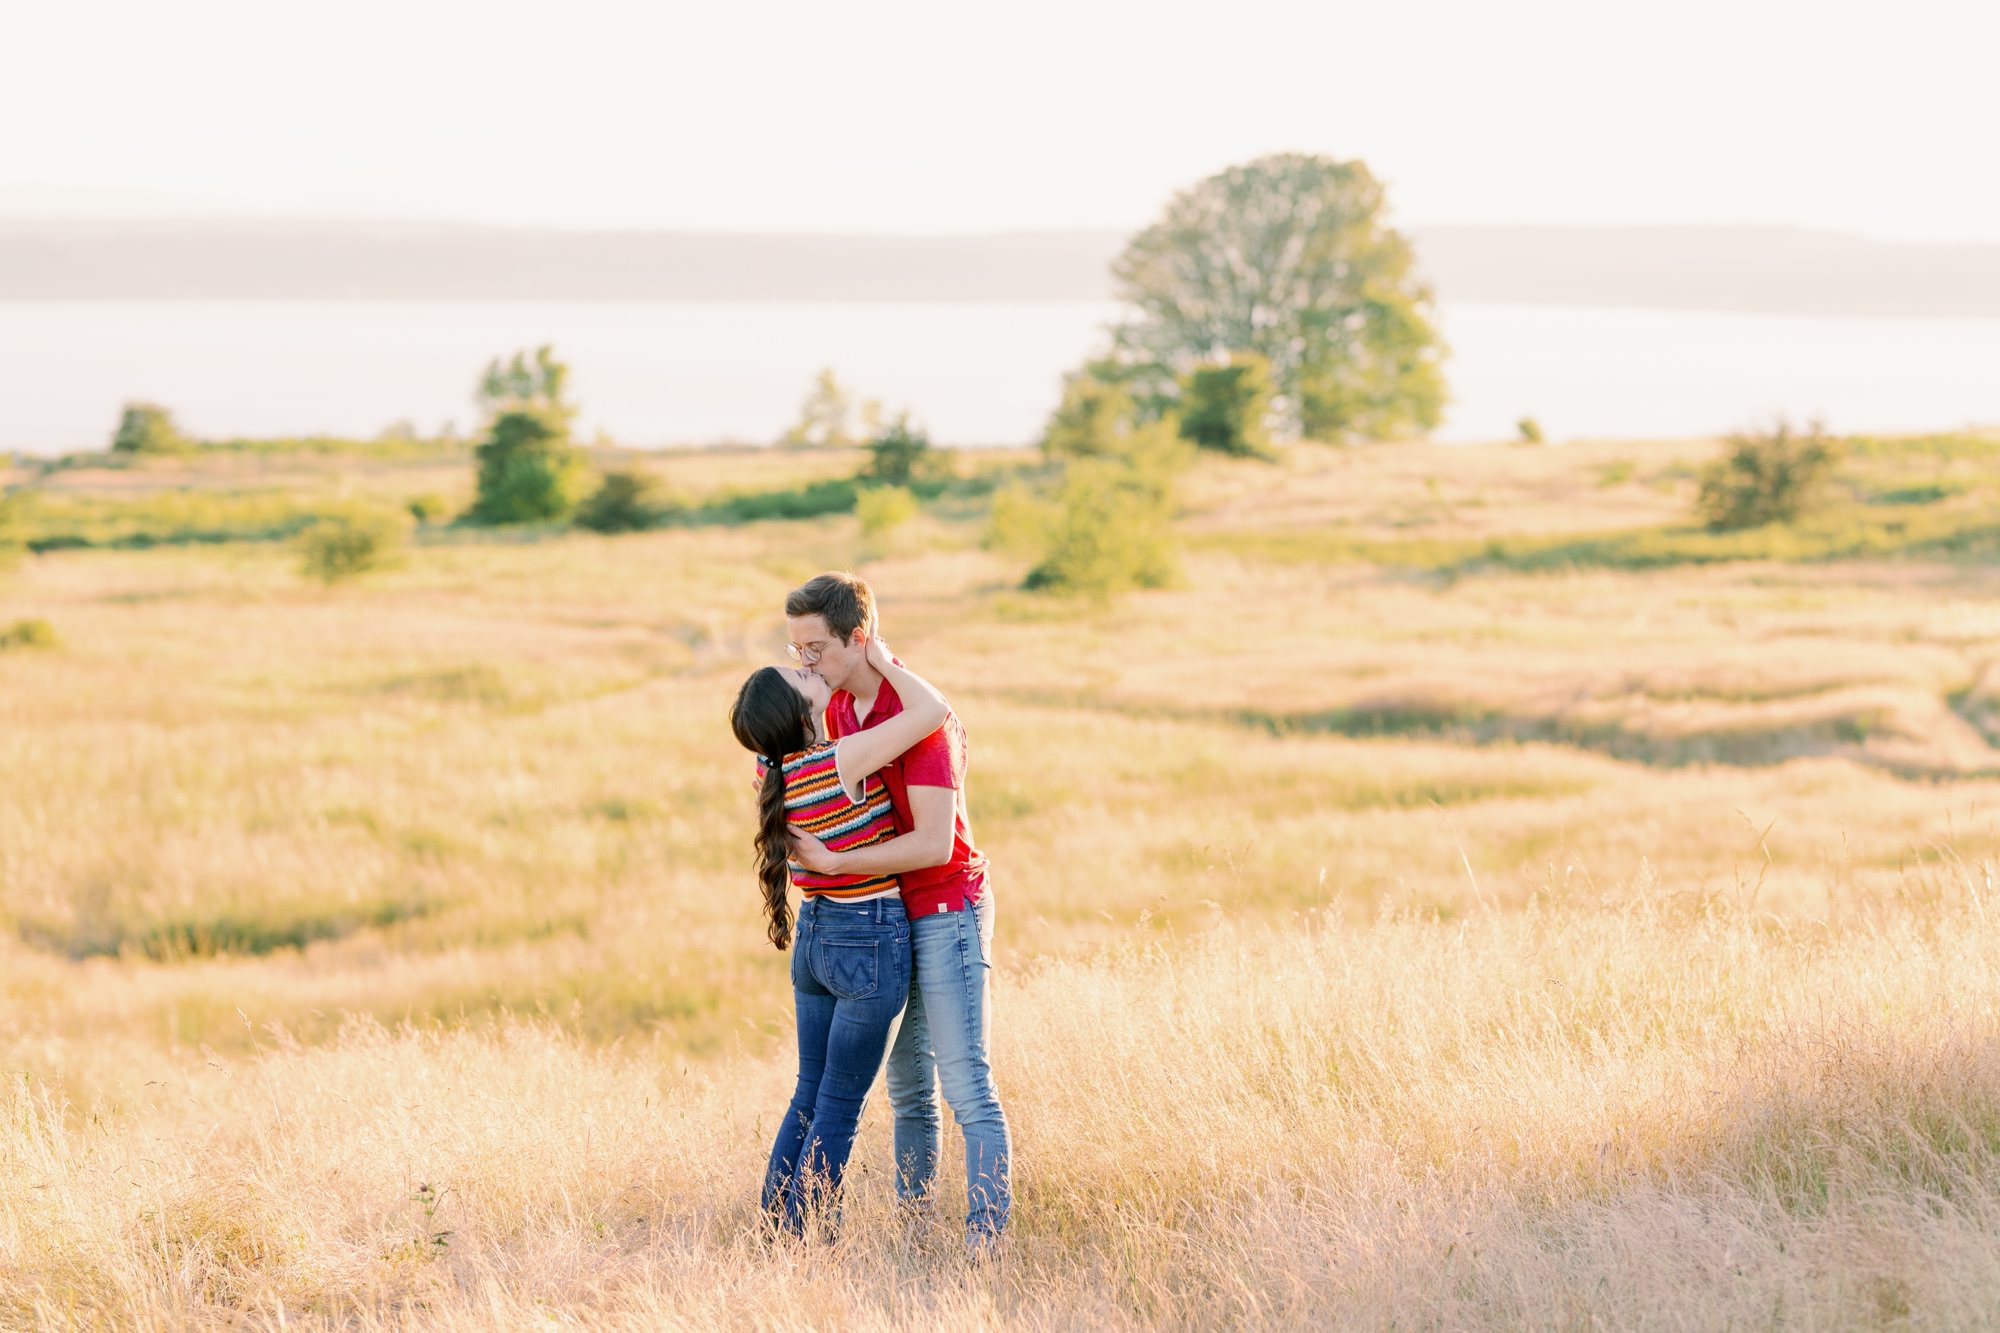 A couple sharing a kiss in a golden field with a scenic background of trees and water.